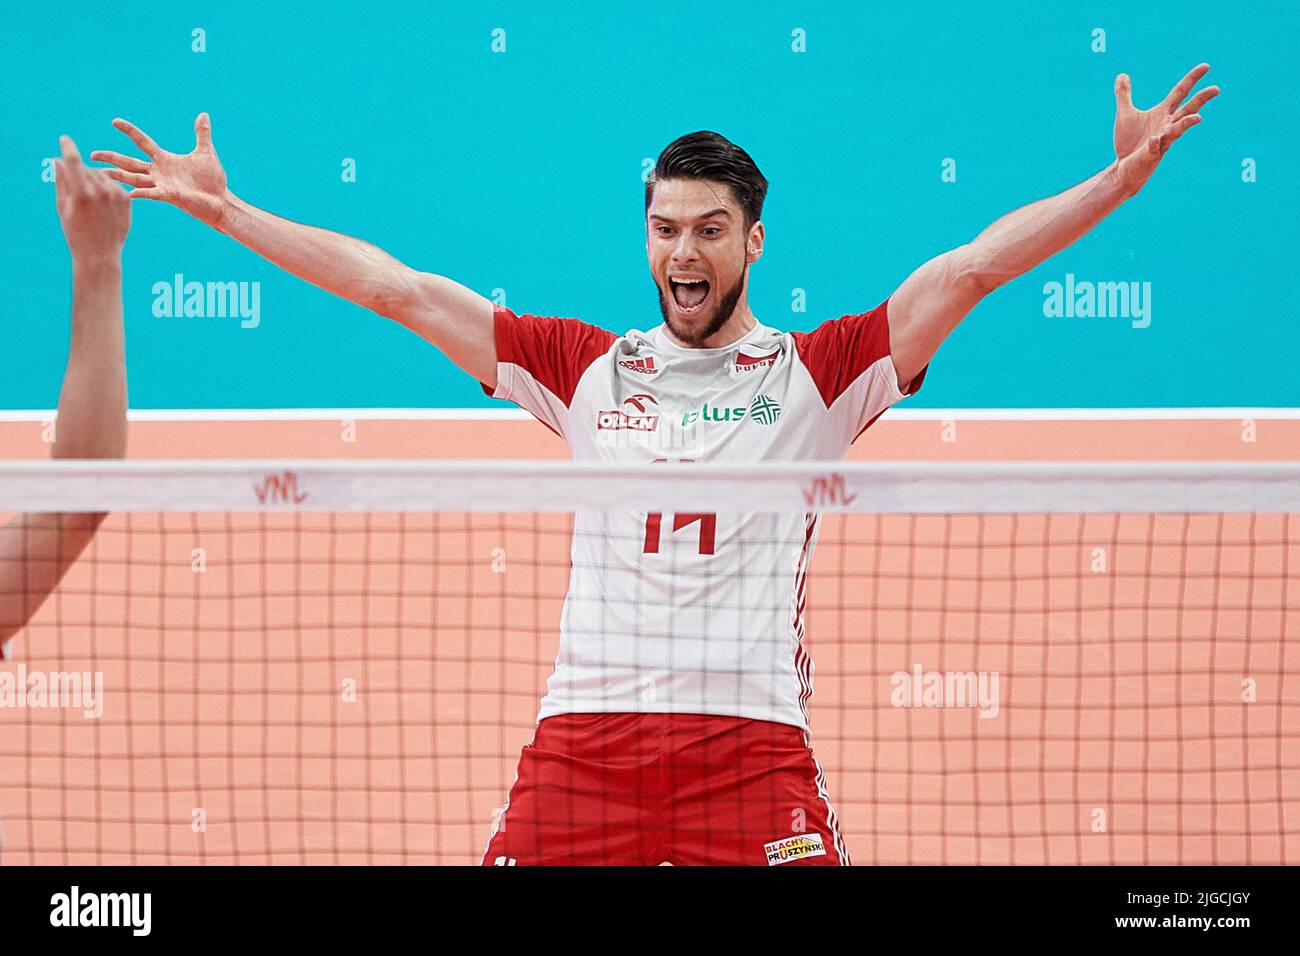 Gdansk, Poland. 09th July, 2022. Aleksander Sliwka of Poland during the 2022 men's FIVB Volleyball Nations League match between Poland and the Netherlands in Gdansk, Poland, 09 July 2022. Credit: PAP/Alamy Live News Stock Photo